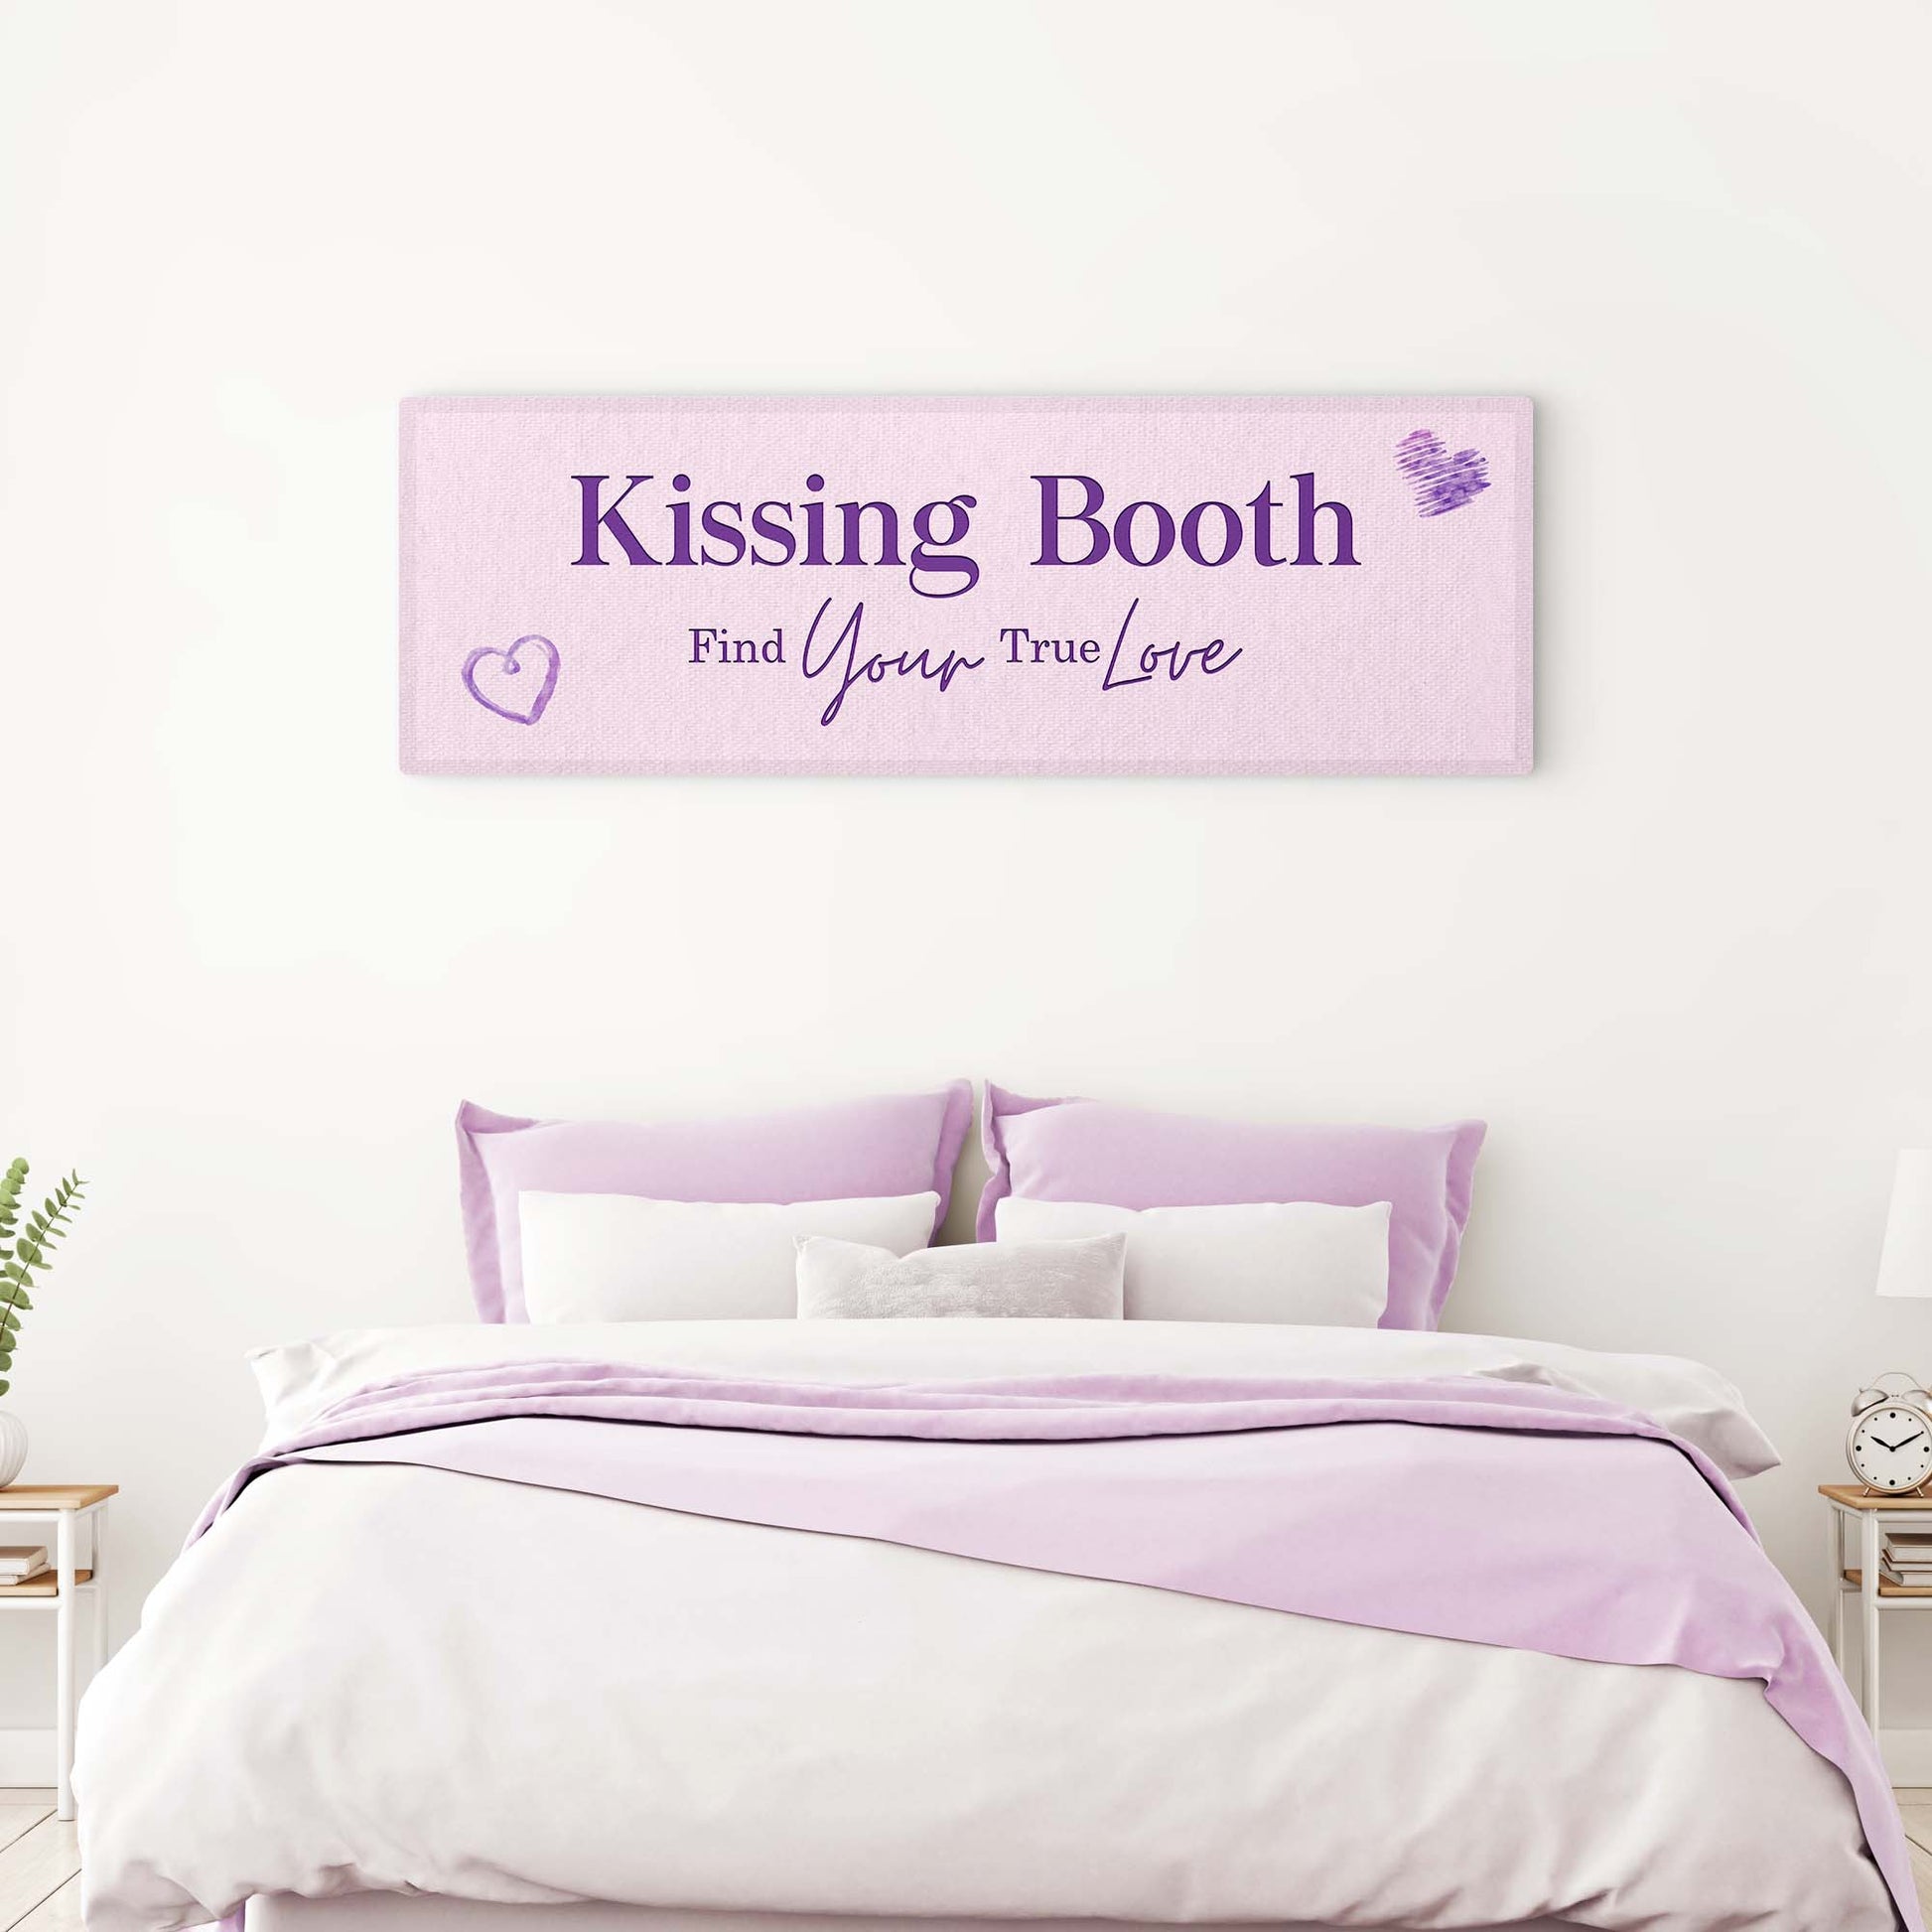 Kissing Booth Find Your True Love Sign - Image by Tailored Canvases